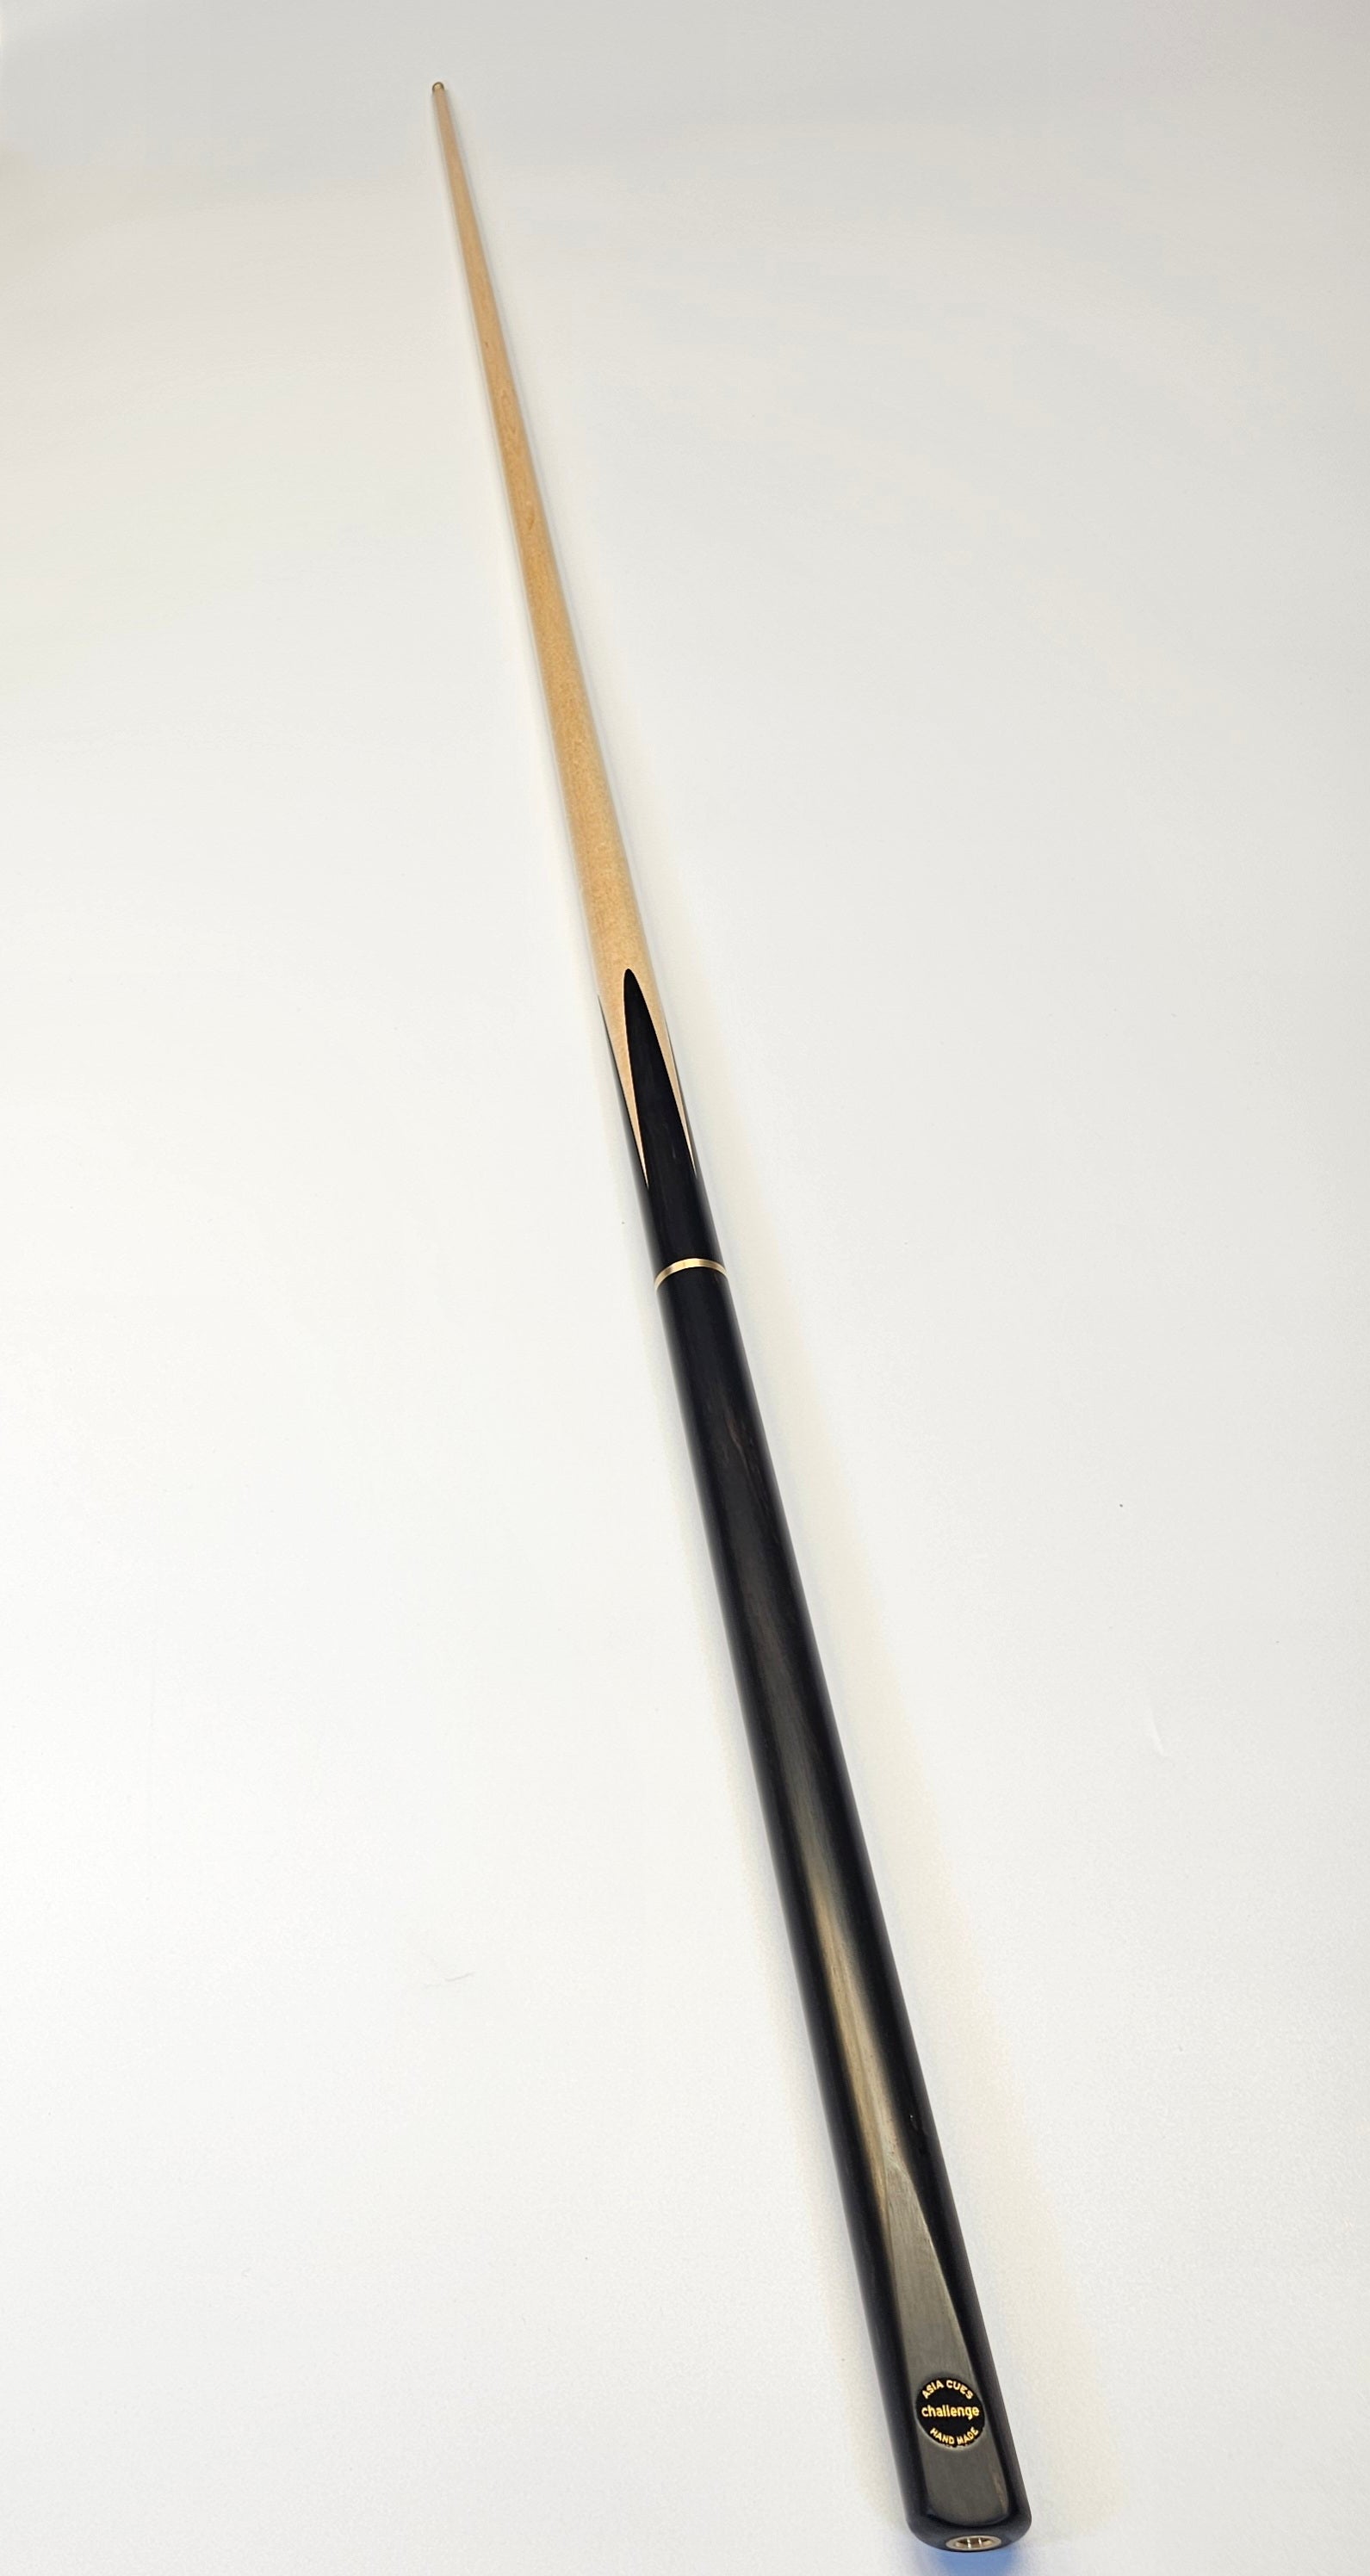 Asia Cues Challenge - 3/4 Jointed Pool Cue 8.5mm, 17.5oz, 58"